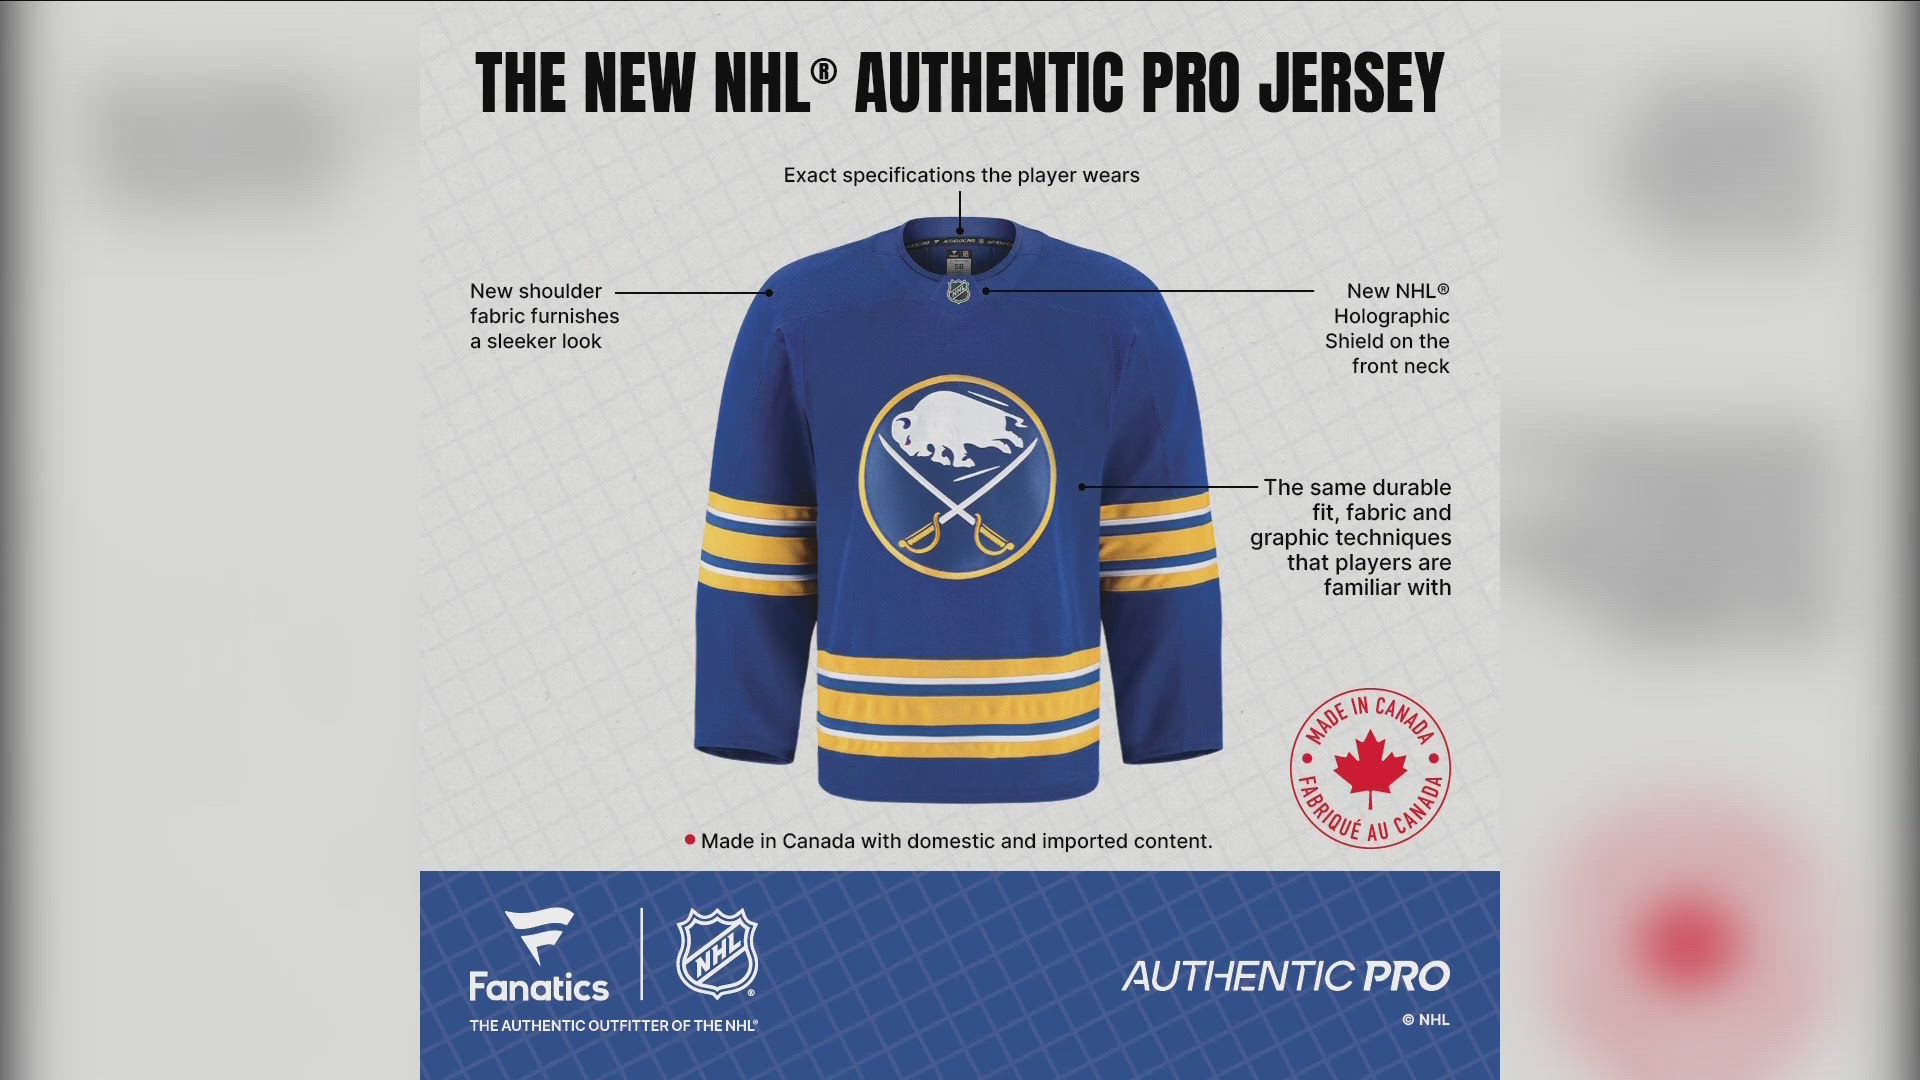 this is the newest sabres jersey released by the NHL and fanatics.
it features new shoulder fabrics, a new shield with a special hologram finish, and fanatics brand